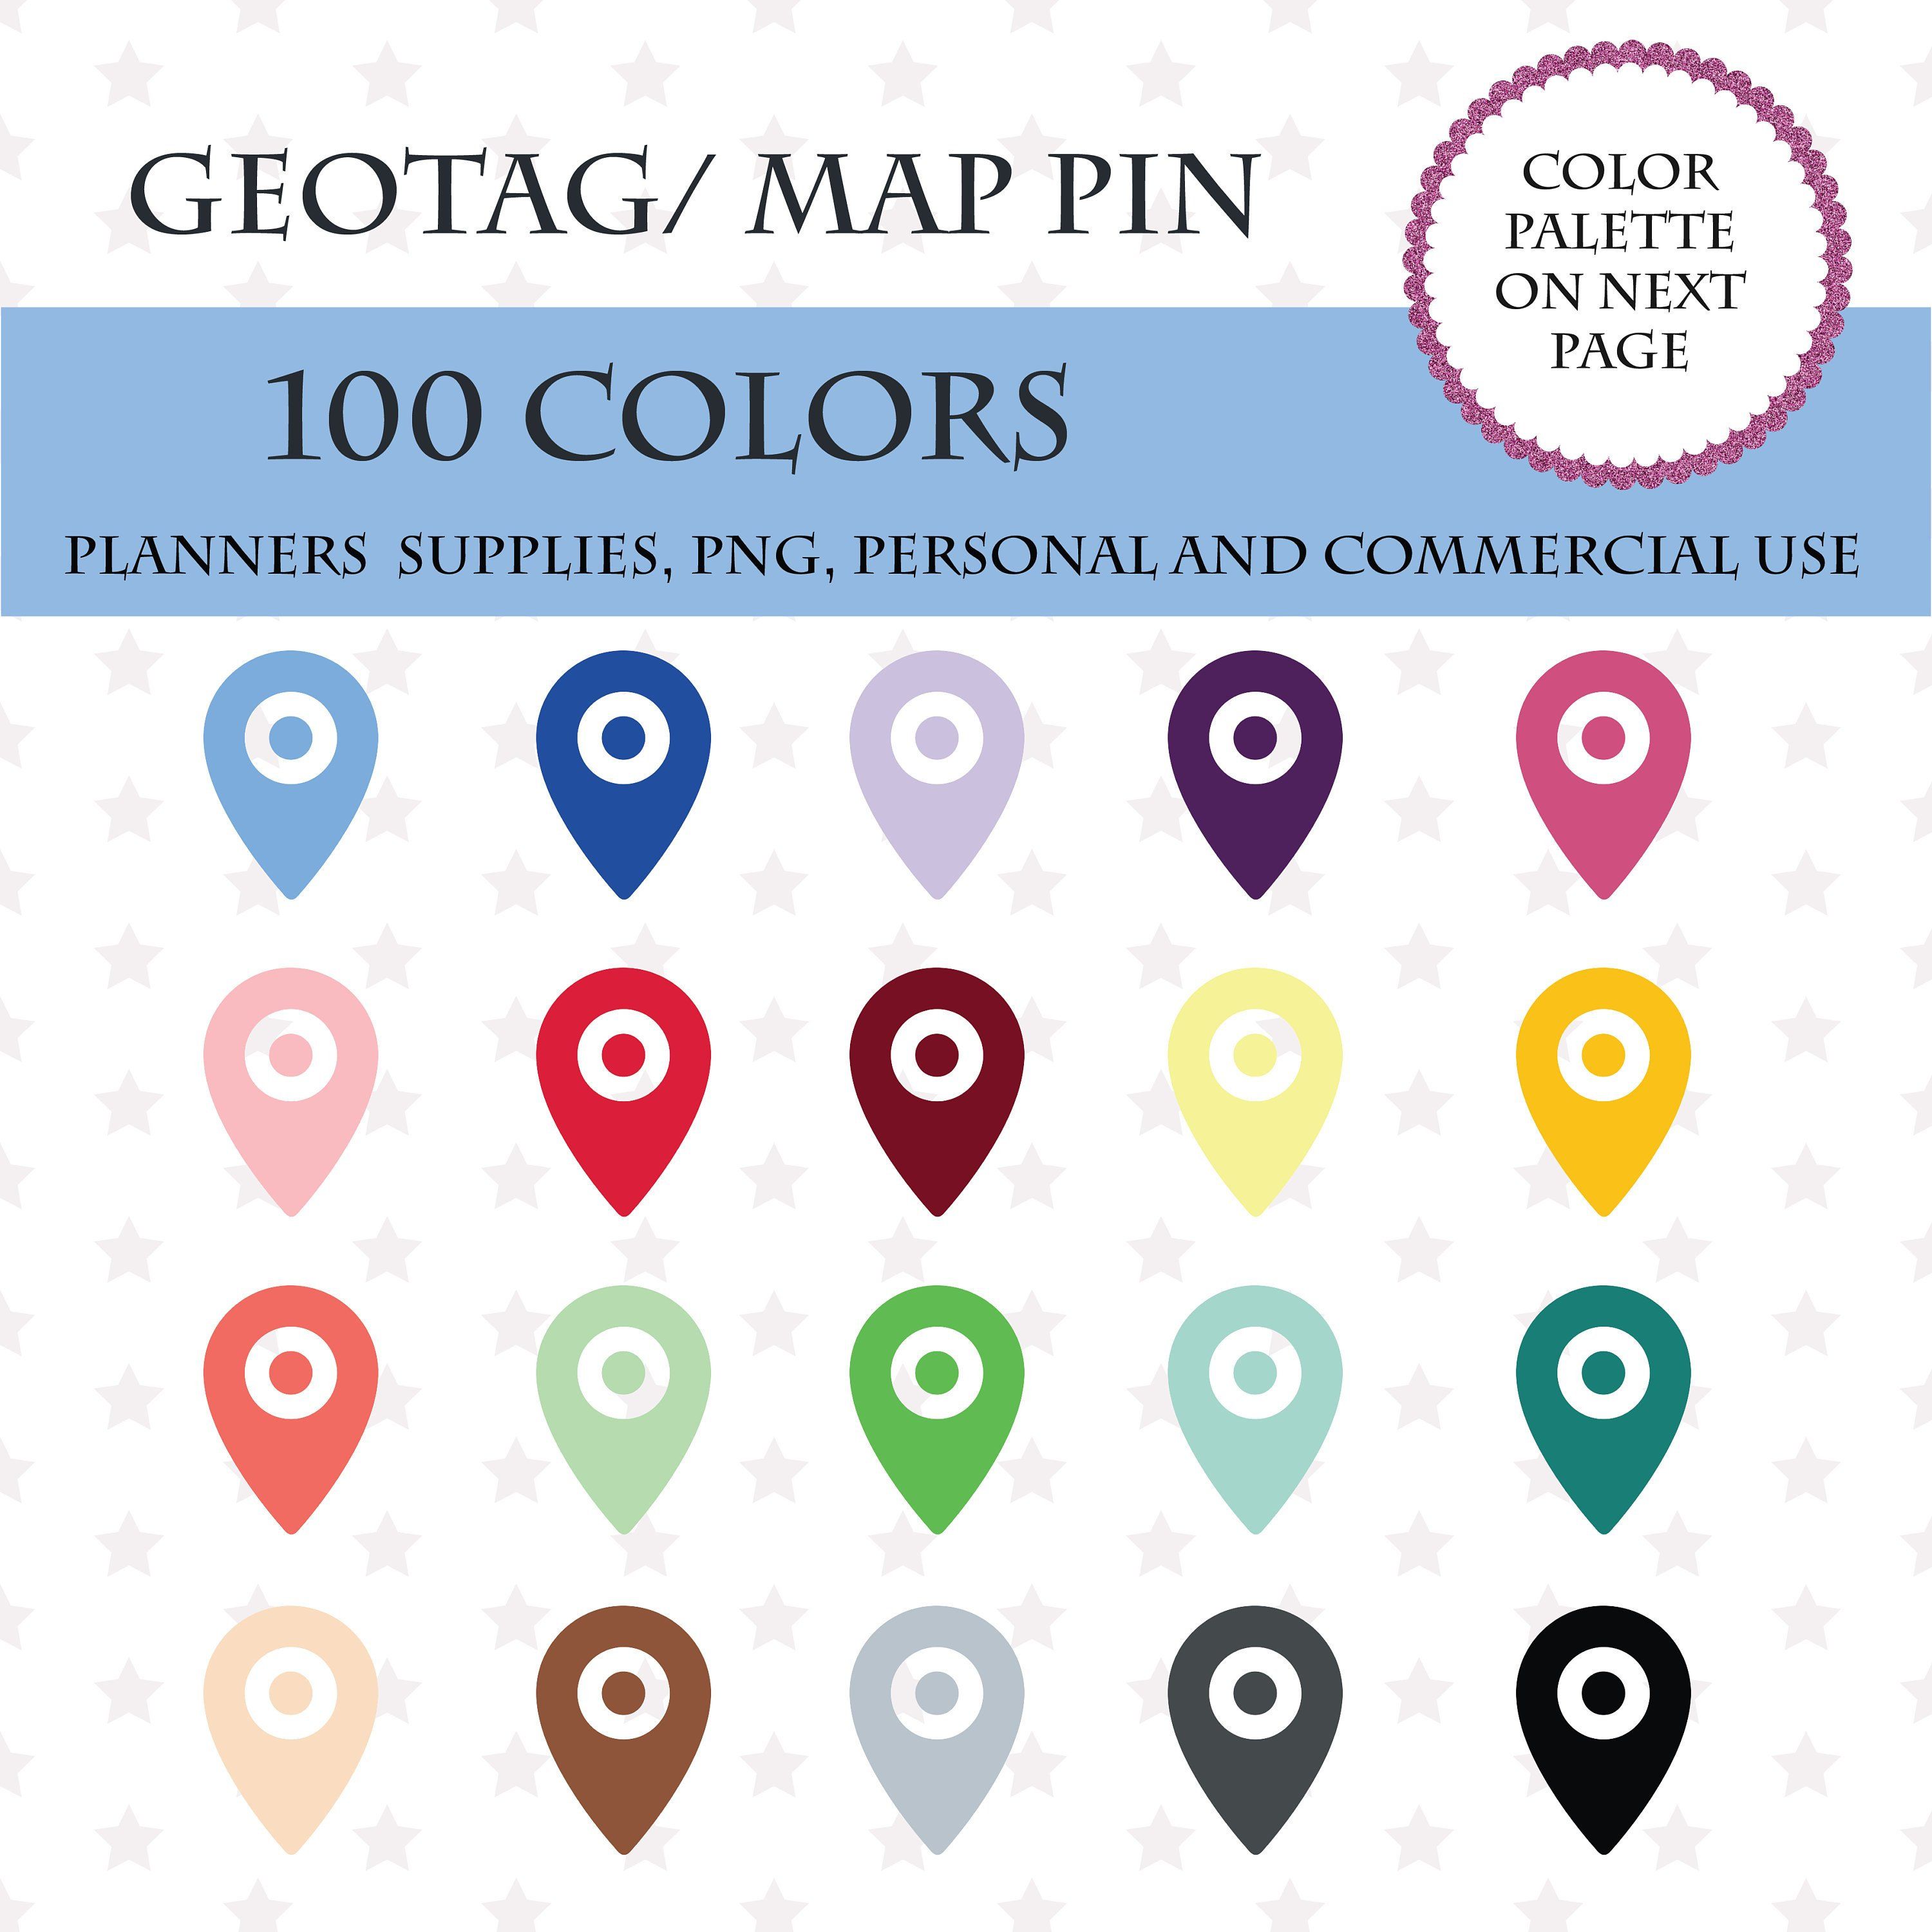 pin clipart location tag